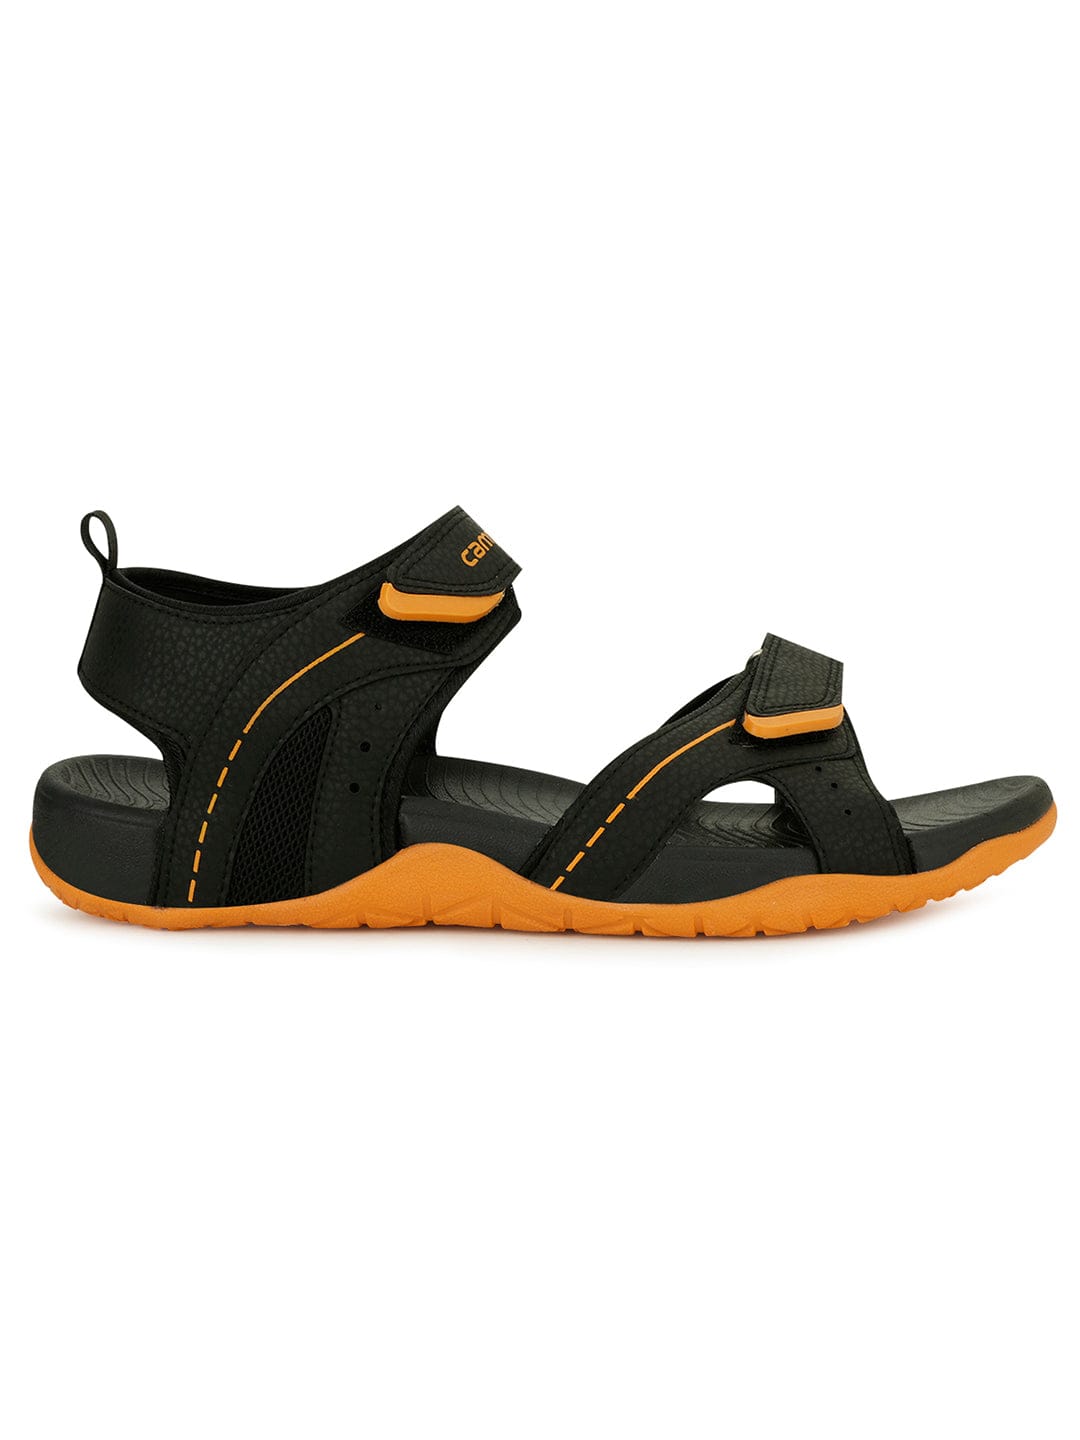 PEAK TAICHI Hole Shoes Men's Lightweight Quick-Drying Sports Sandals